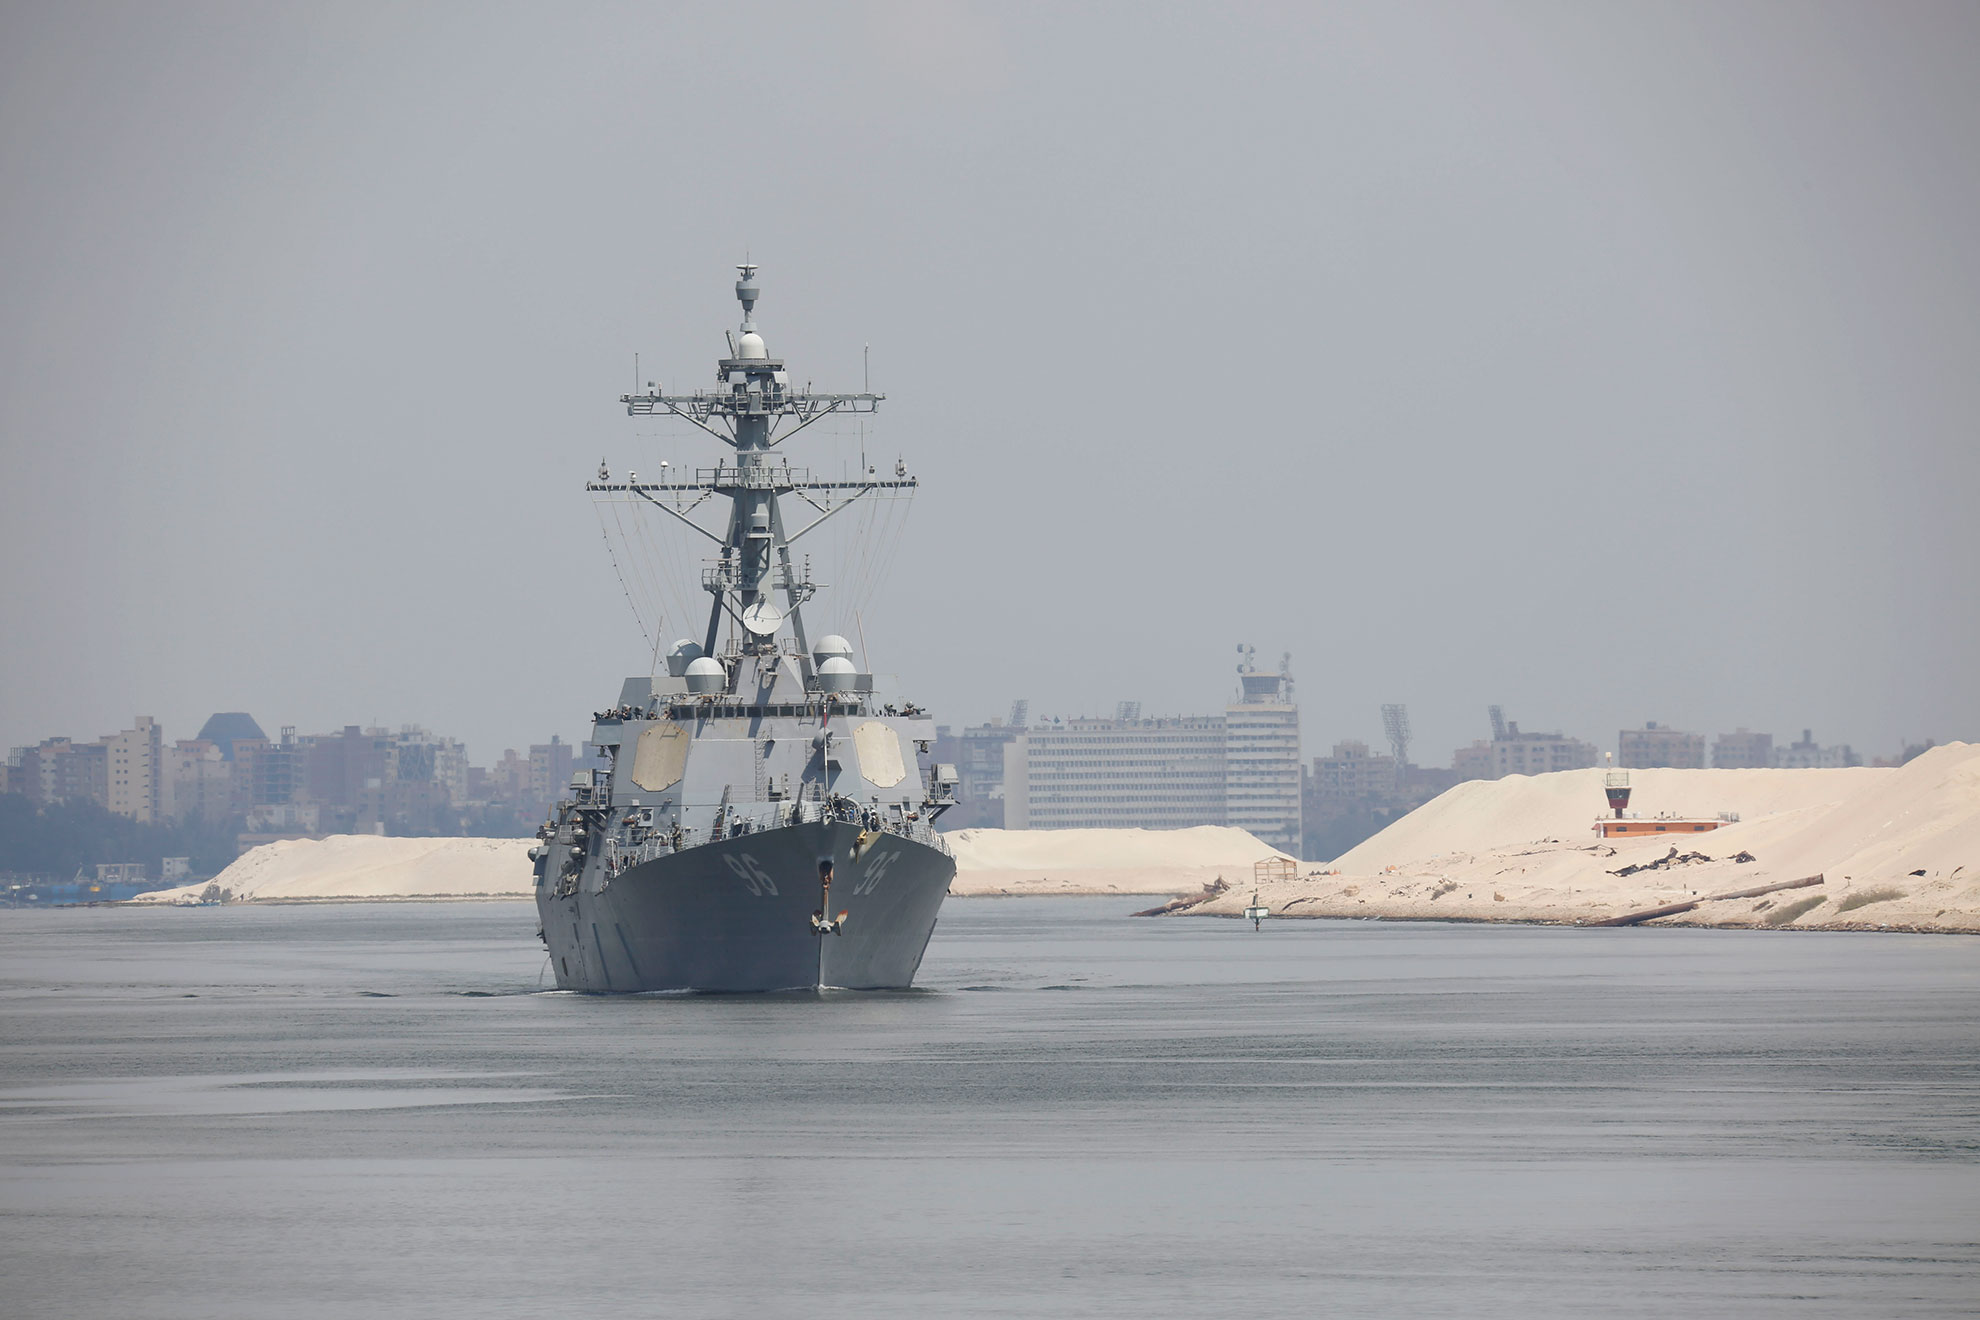 Suez Canal (May 9, 2019) The Arleigh Burke-class guided-missile destroyer USS Bainbridge (DDG 96) transits the Suez Canal. The Abraham Lincoln Carrier Strike Group (ABECSG) is deployed to the U.S. Central Command area of responsibility in order to defend American forces and interests in the region. With Abraham Lincoln as the flagship, deployed strike group assets include staffs, ships and aircraft of Carrier Strike Group 12 (CSG 12), Destroyer Squadron 2 (DESRON 2), USS Leyte Gulf (CG 55) and Carrier Air Wing 7 (CVW 7); as well as the Spanish navy lvaro de Bazan-class frigate ESPS Mendez Nñez (F 104) -- US Navy photo by MCS Seaman Michael Singley. -